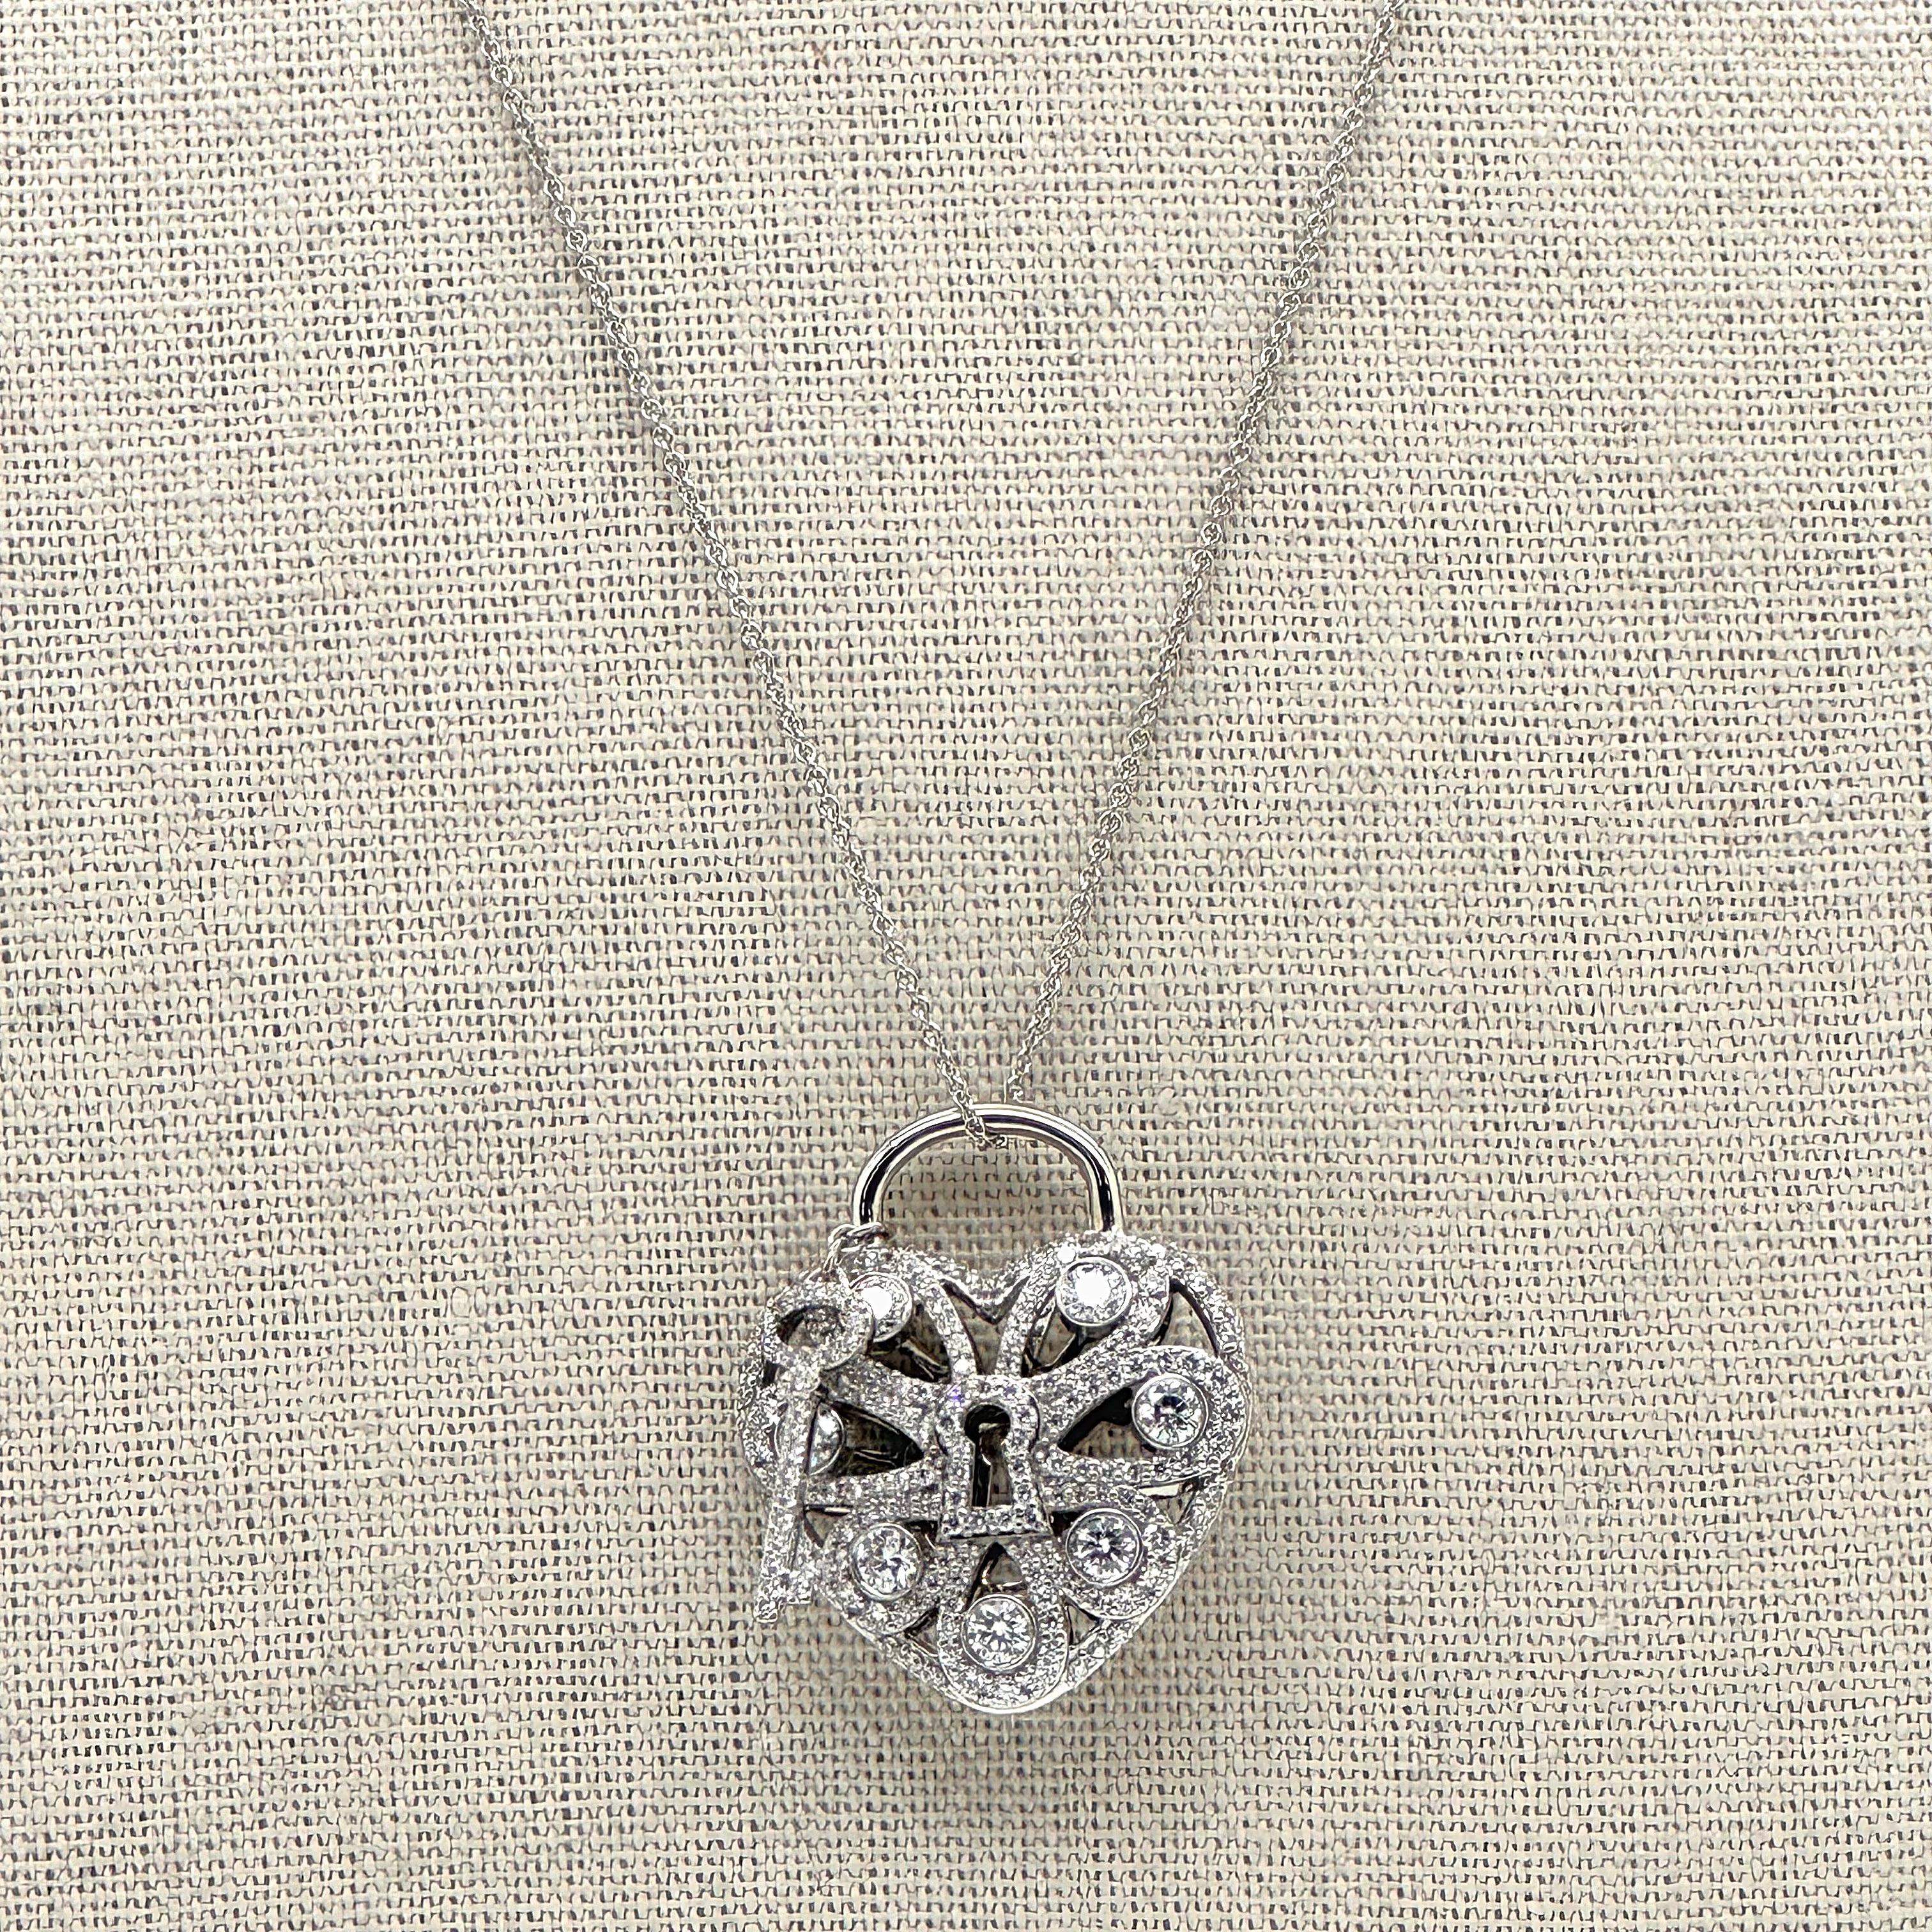 Tiffany & Co. Large Filigree Heart Key Diamond Pendant Necklace 18kt White Gold In Excellent Condition For Sale In San Diego, CA